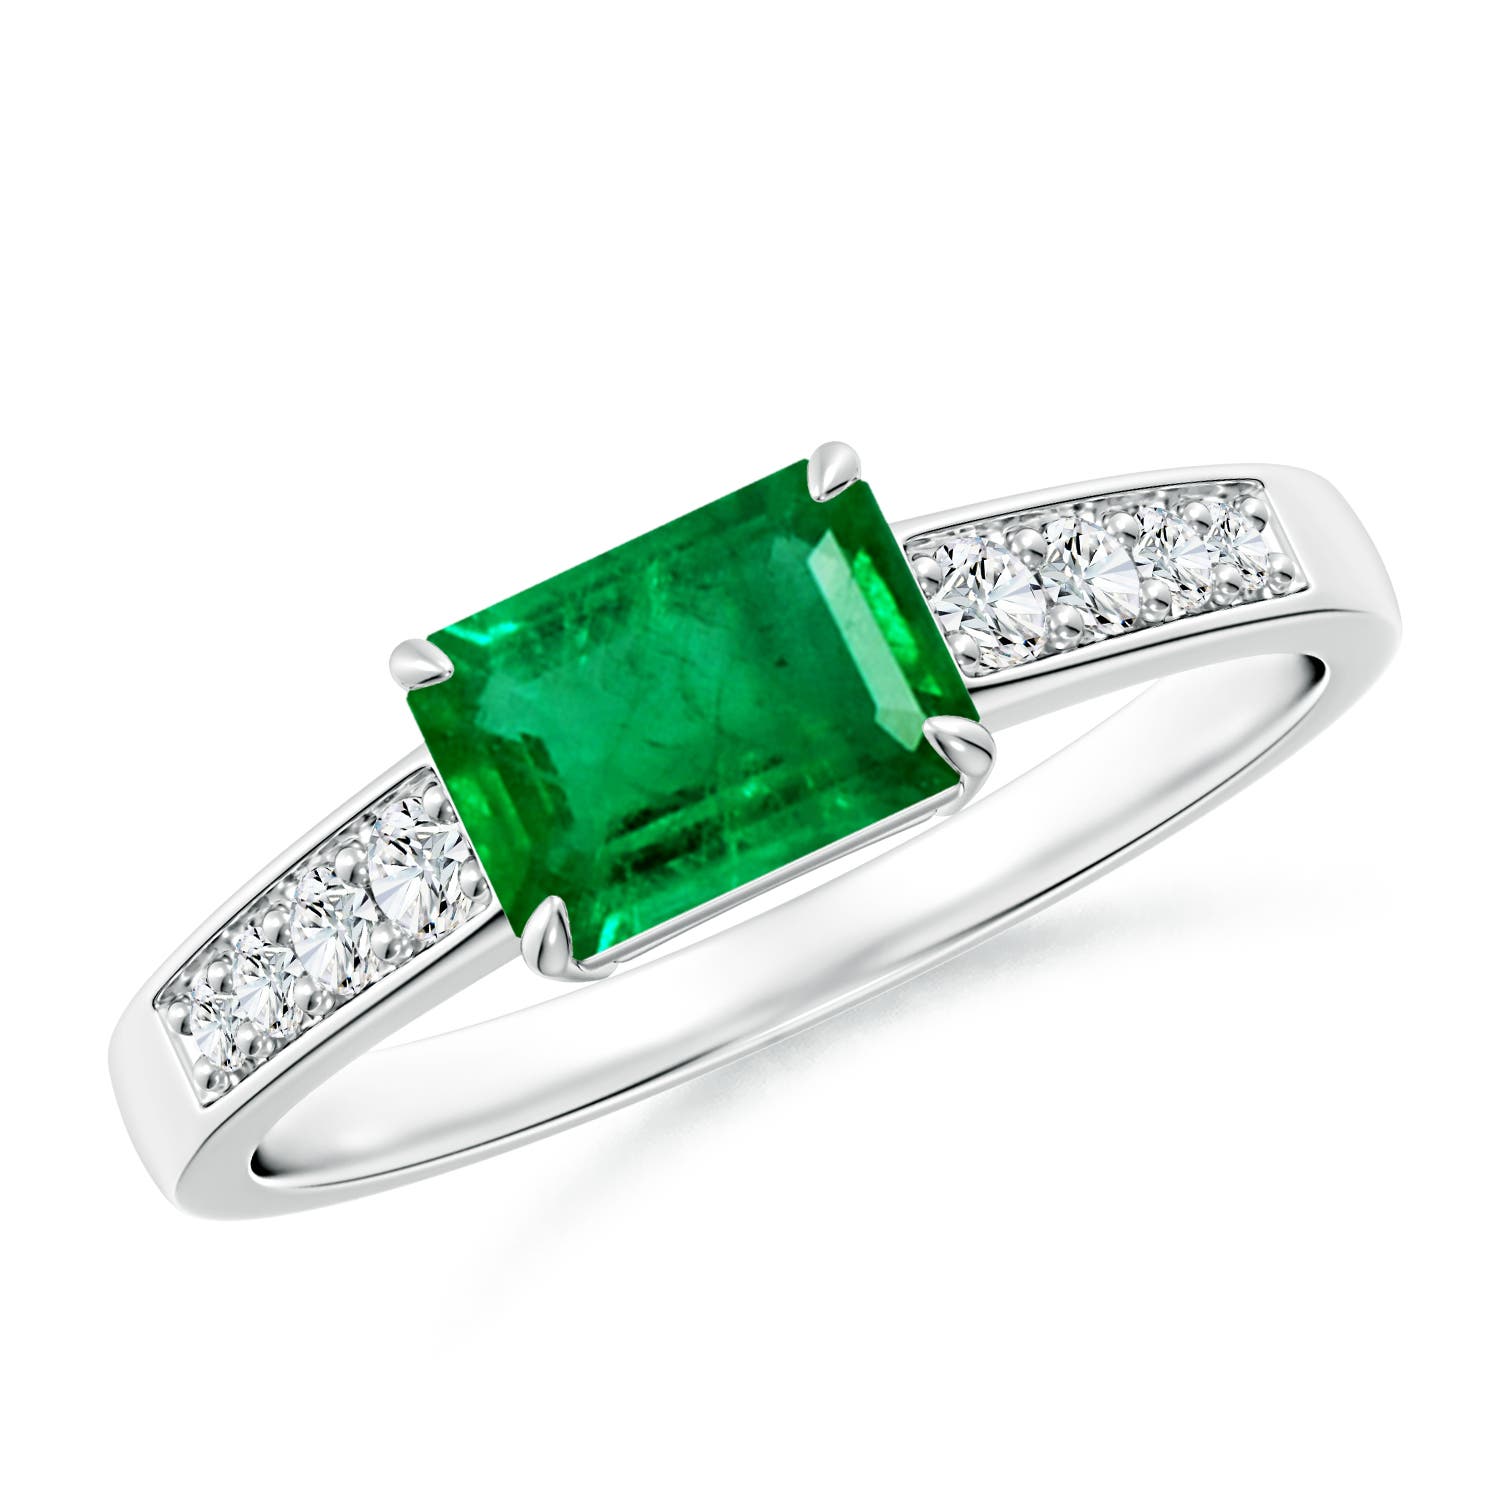 AAA - Emerald / 1.18 CT / 14 KT White Gold